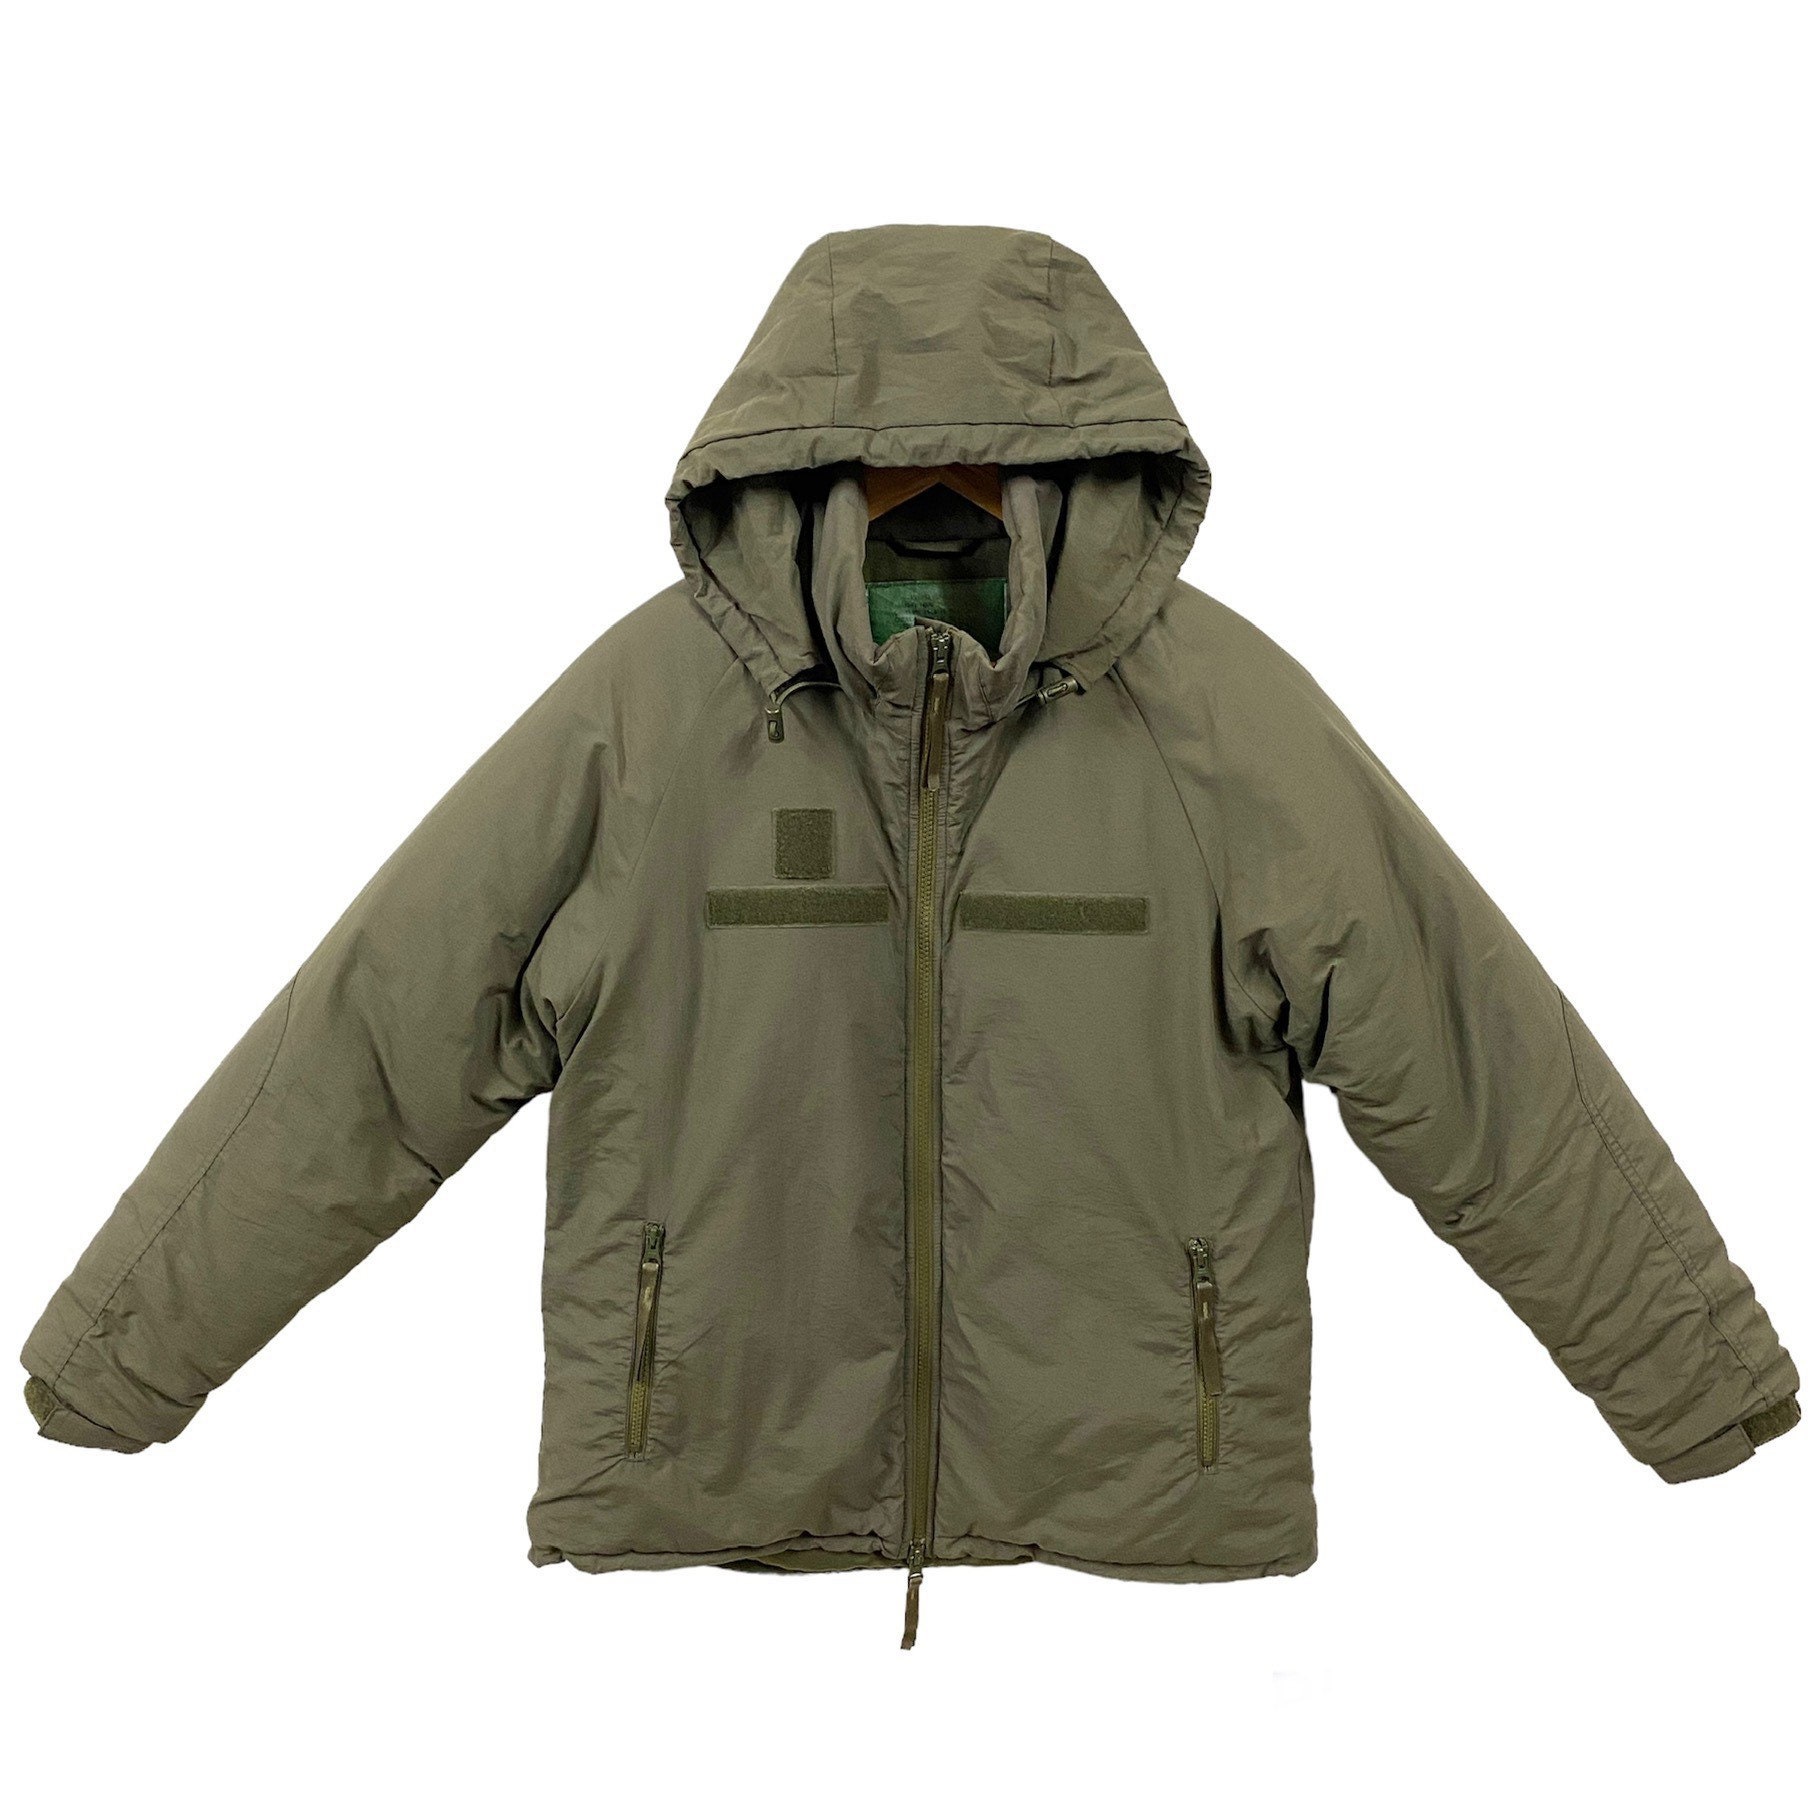 US Army Style Extended Cold Weather Clothing System ECWCS Jacket Gen III  Military Parka 3M Insulation Puffer Coat Houston Inc Japan Green M